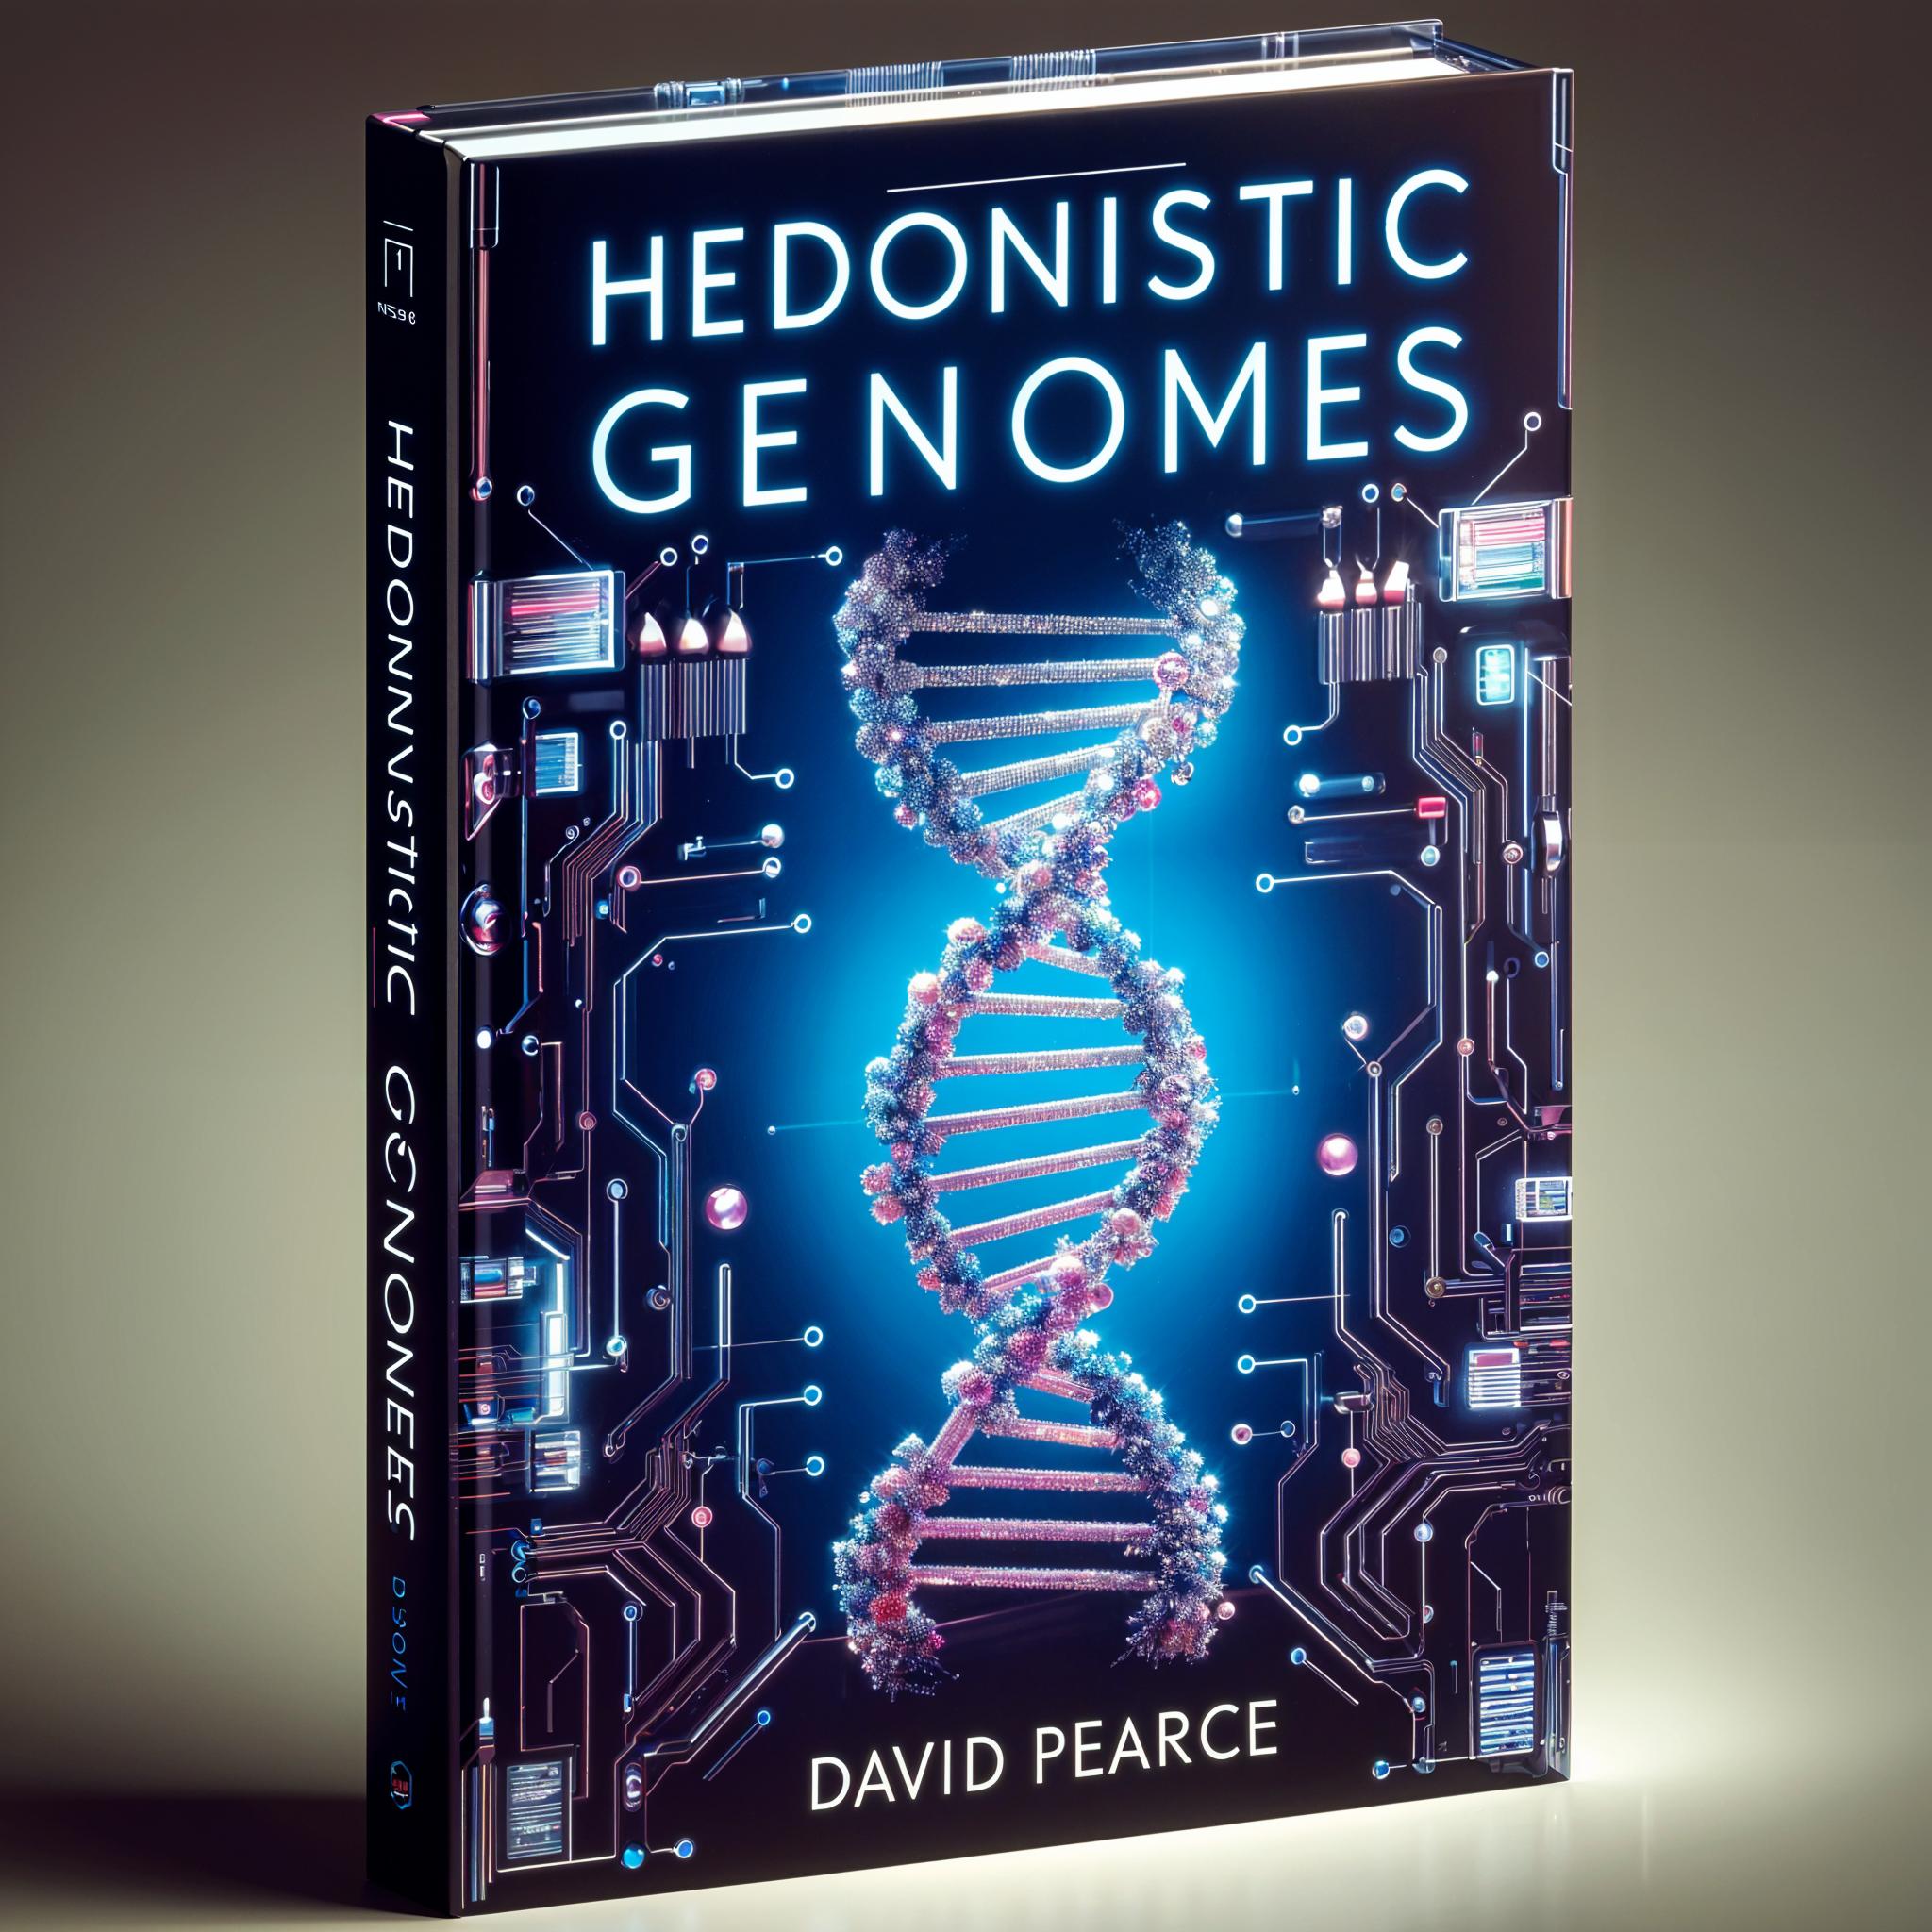 Hedonistic Genomes by David Pearce